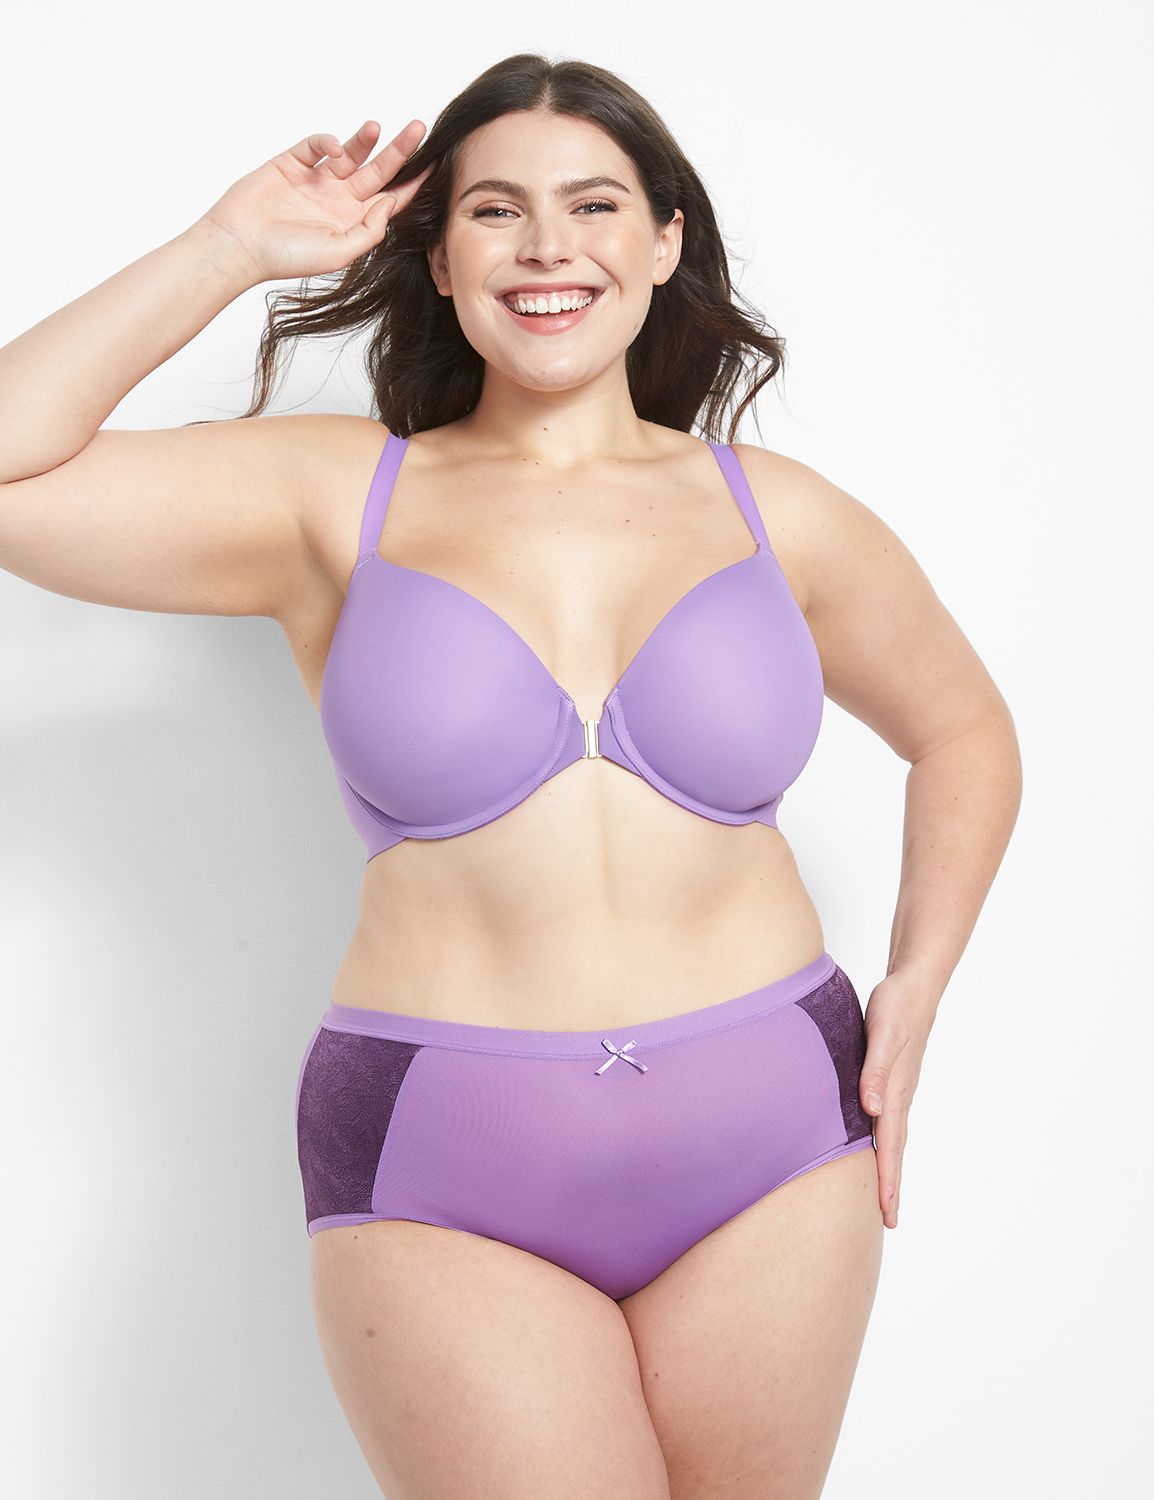 Lane Bryant - We don't just make bras. We make smiles. Lots of smiles. Lots  of sizes. Head over to Cacique for more. #ForTheLoveOfCurves